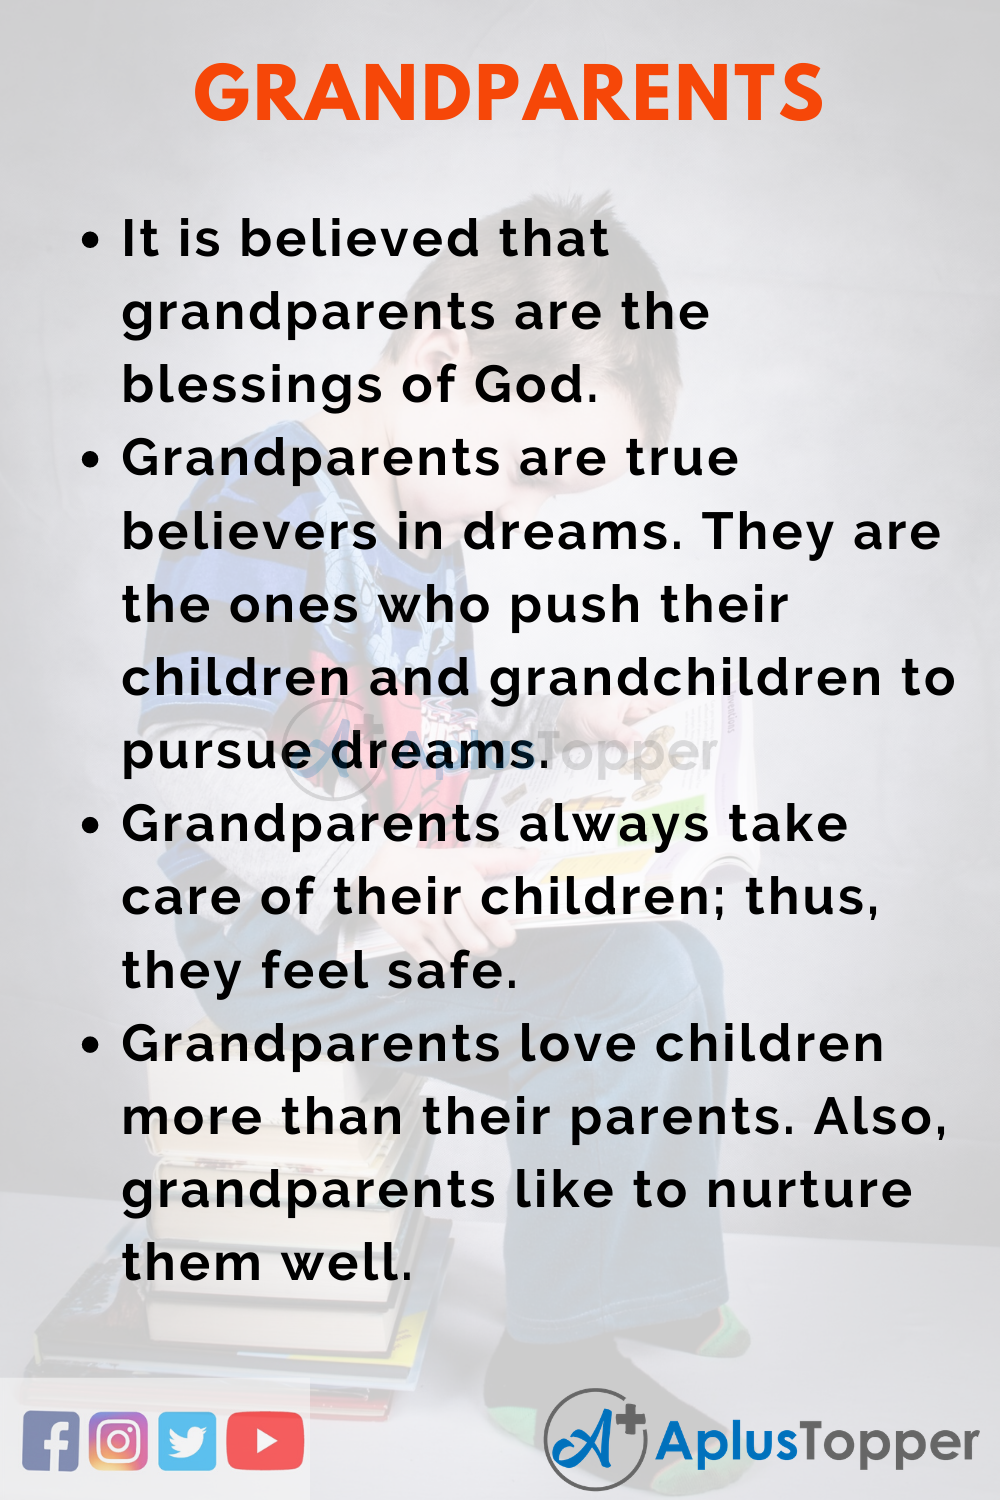 essay on spending time with grandparents